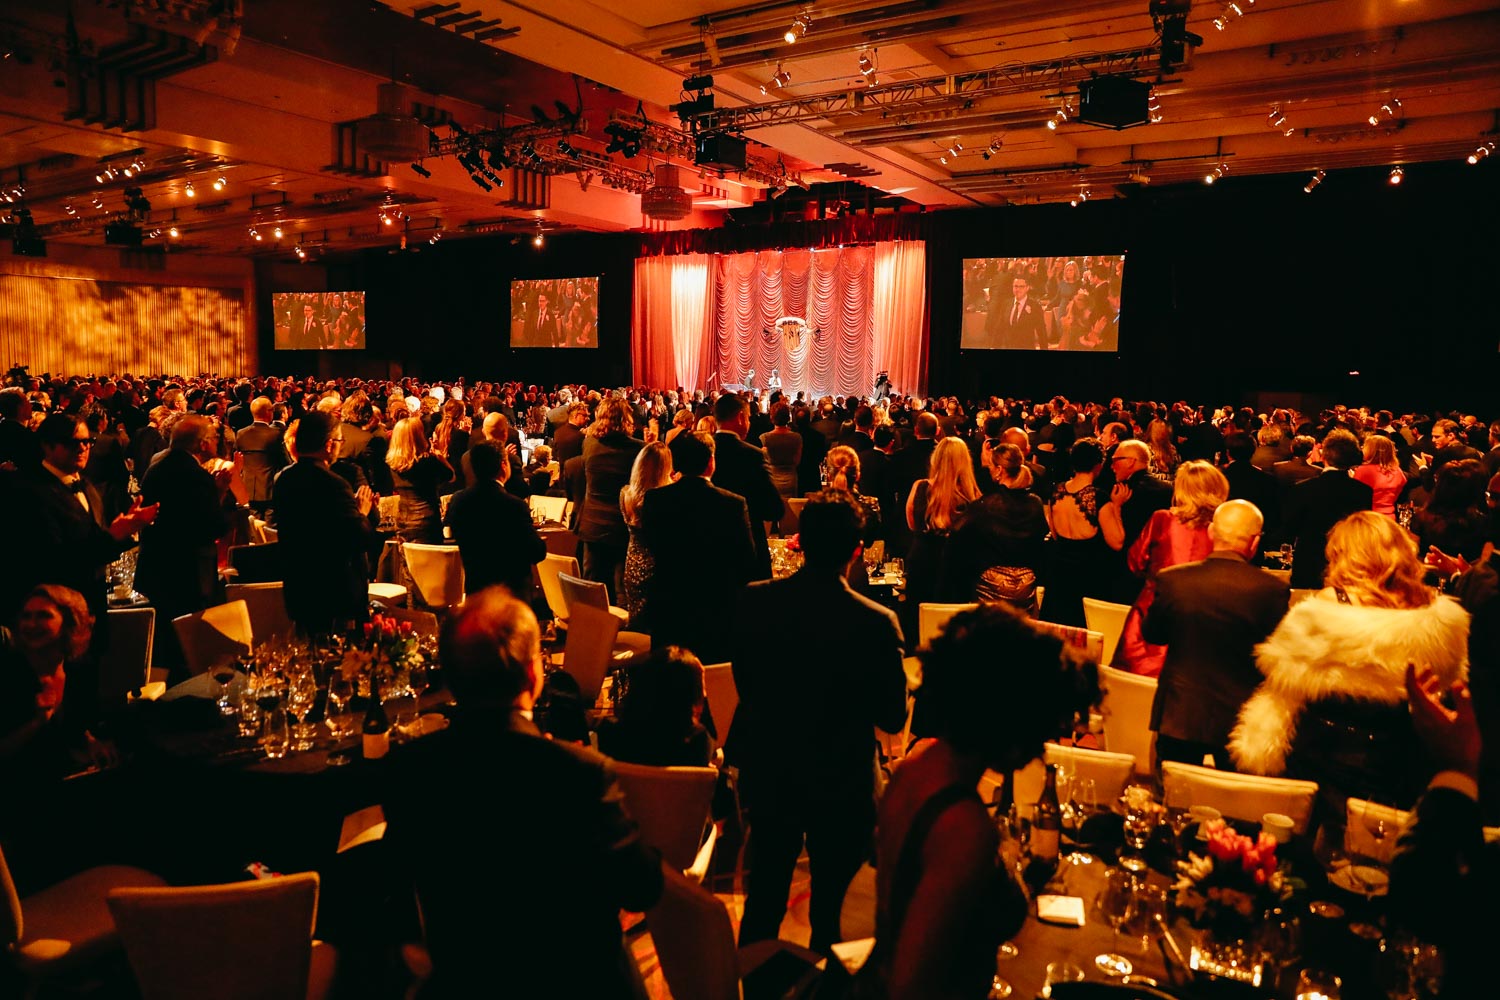 The audience arrives at the Ray Dolby Ballroom for the 31st Annual ASC Awards.